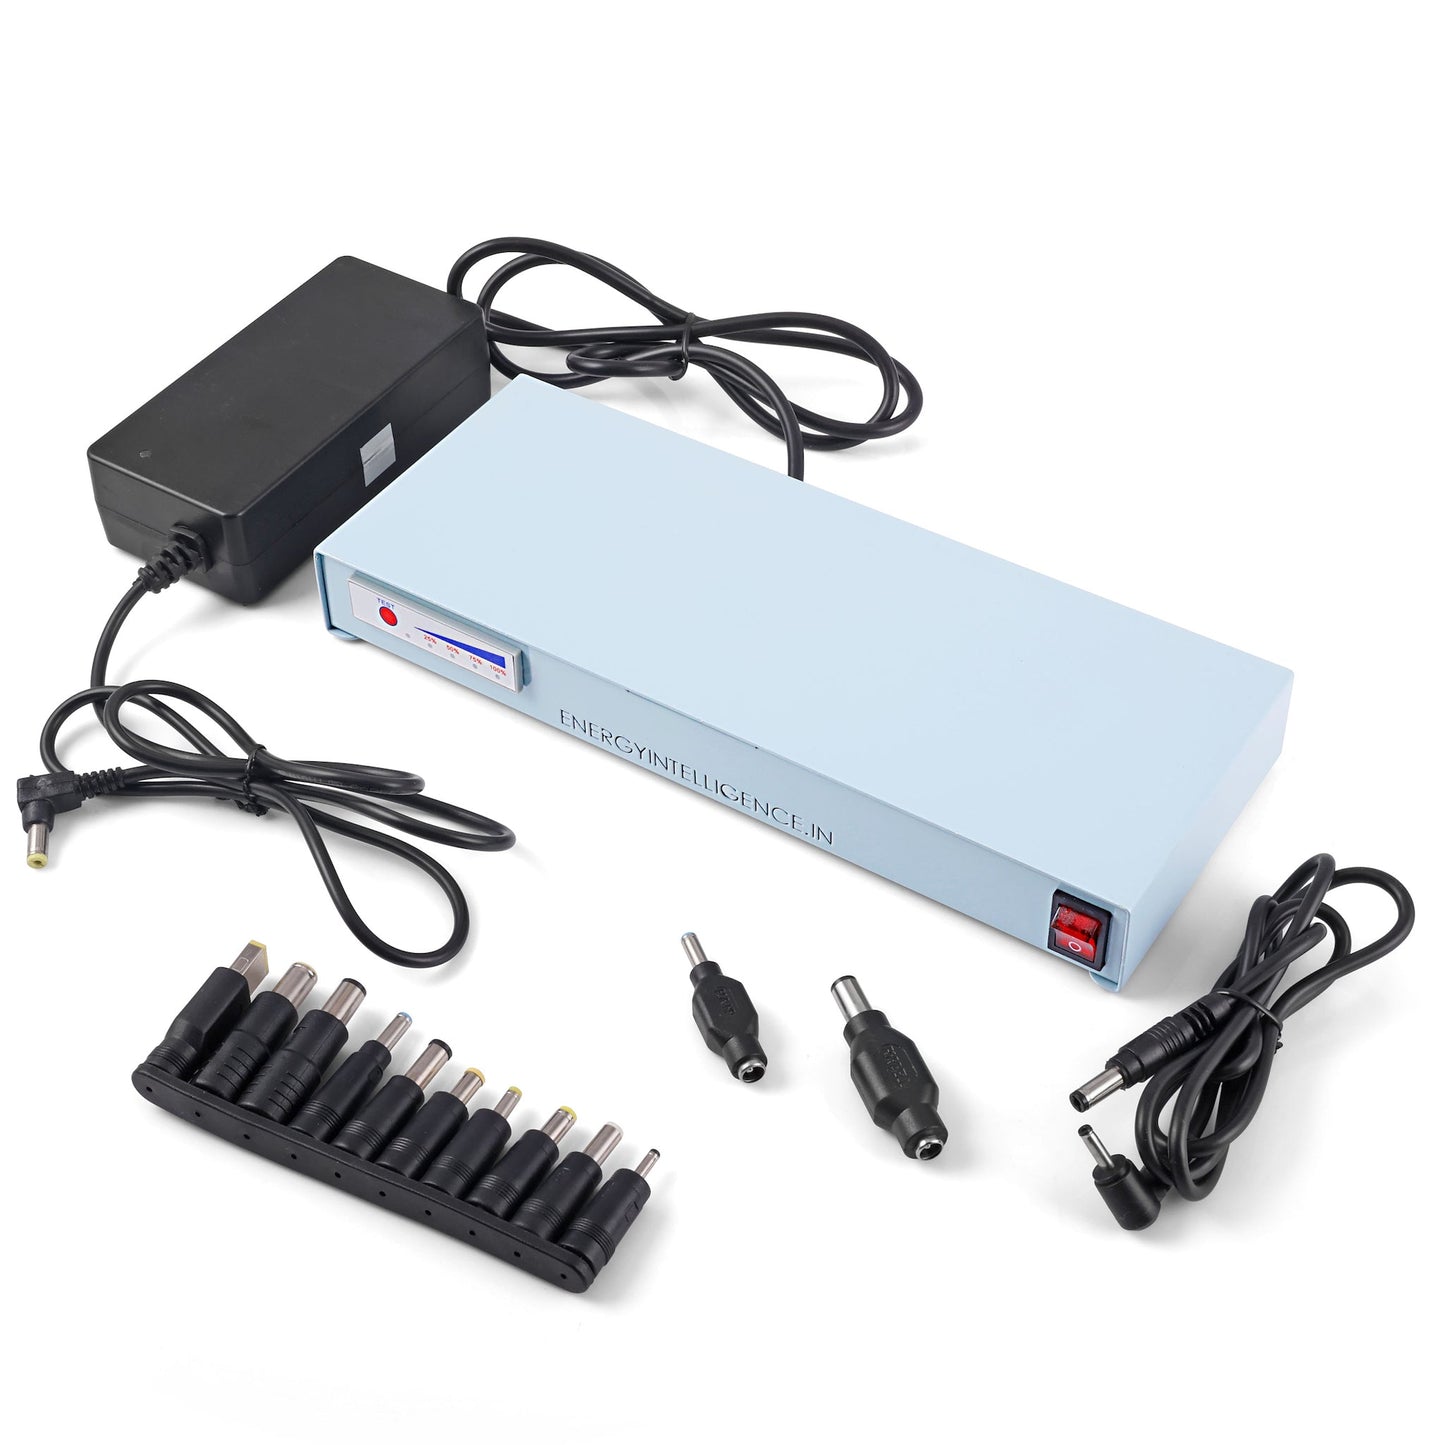 Image of NUC power bank with accesories including the Powerbank, Li-Ion Charger, 12 different pin types and an out out cable